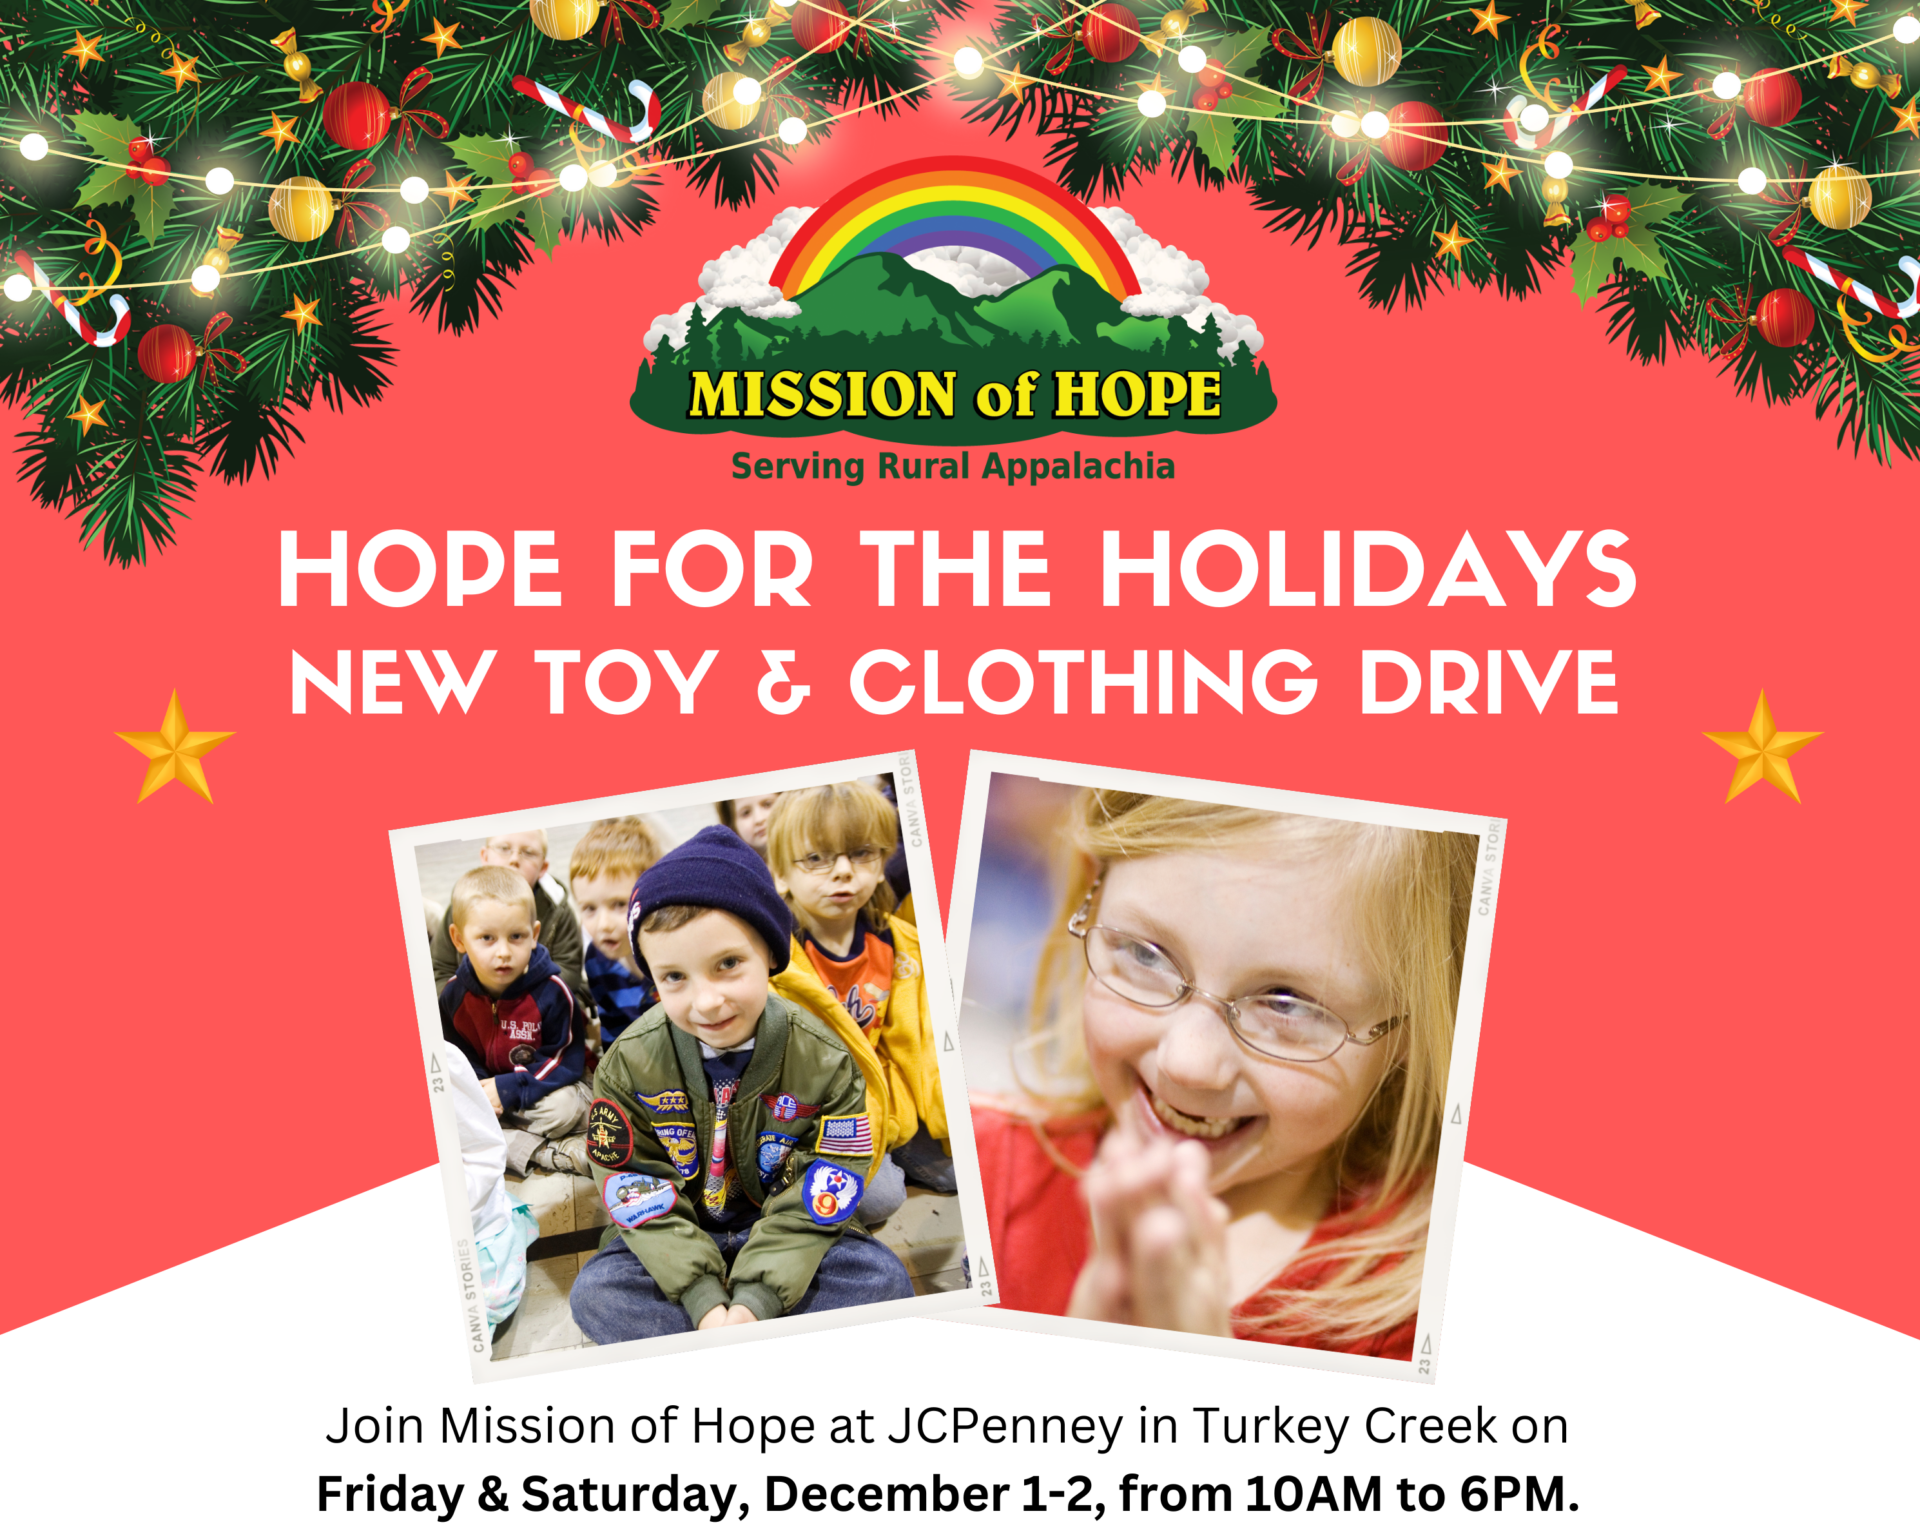 Mission of hope hope for the holidays new toy & clothing drive.